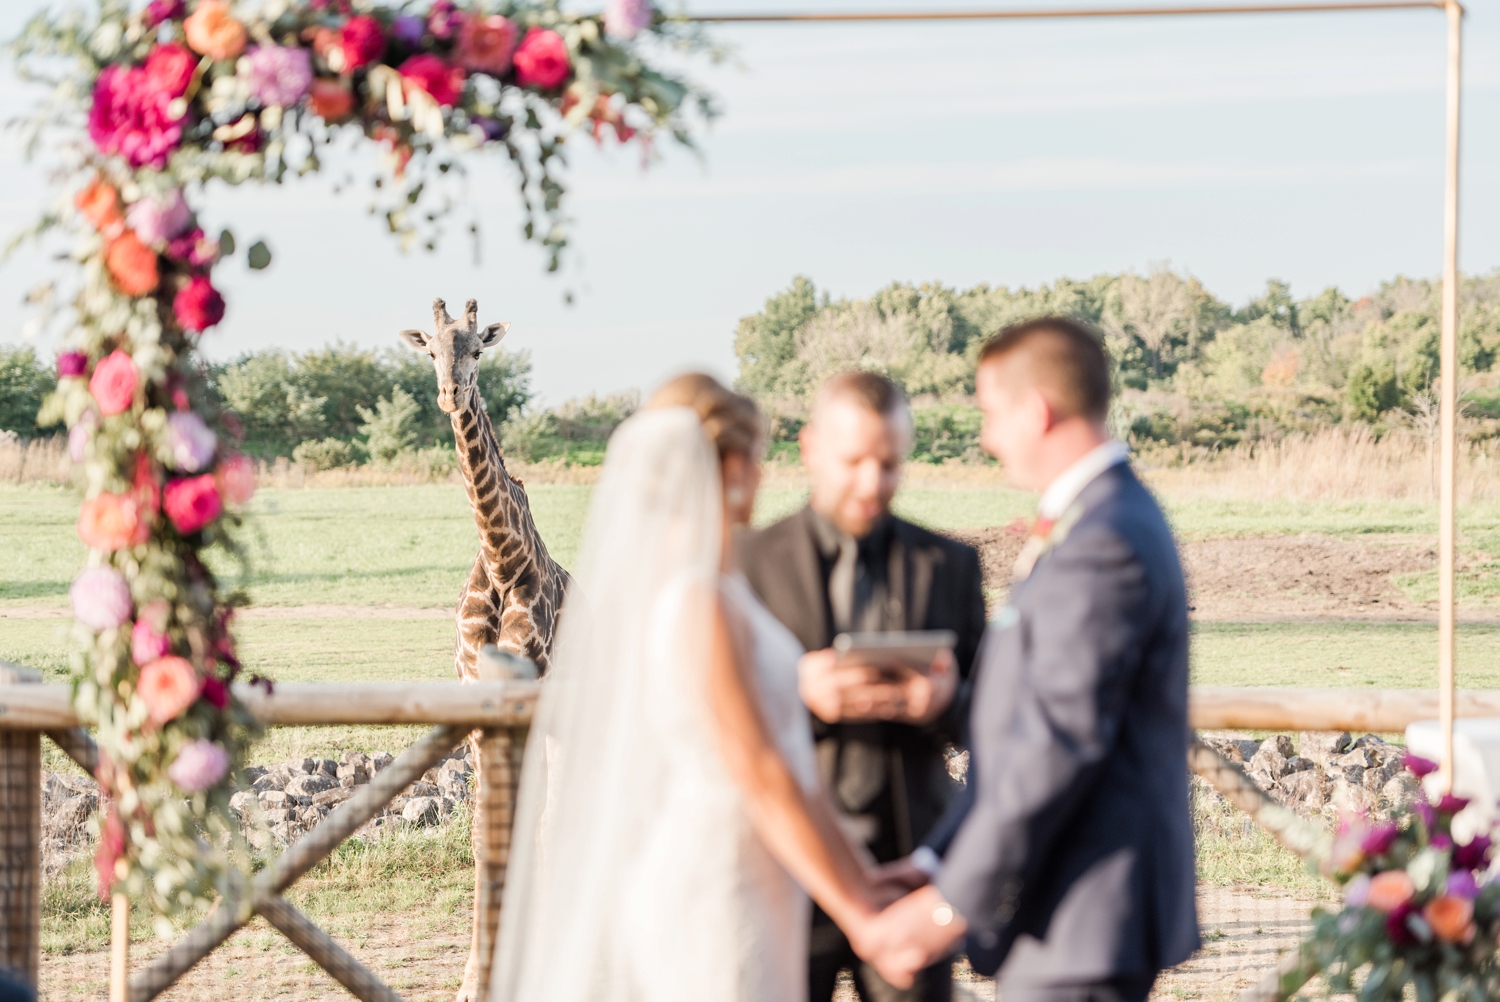 giraffe-peaking-over-during-a-wedding-ceremony